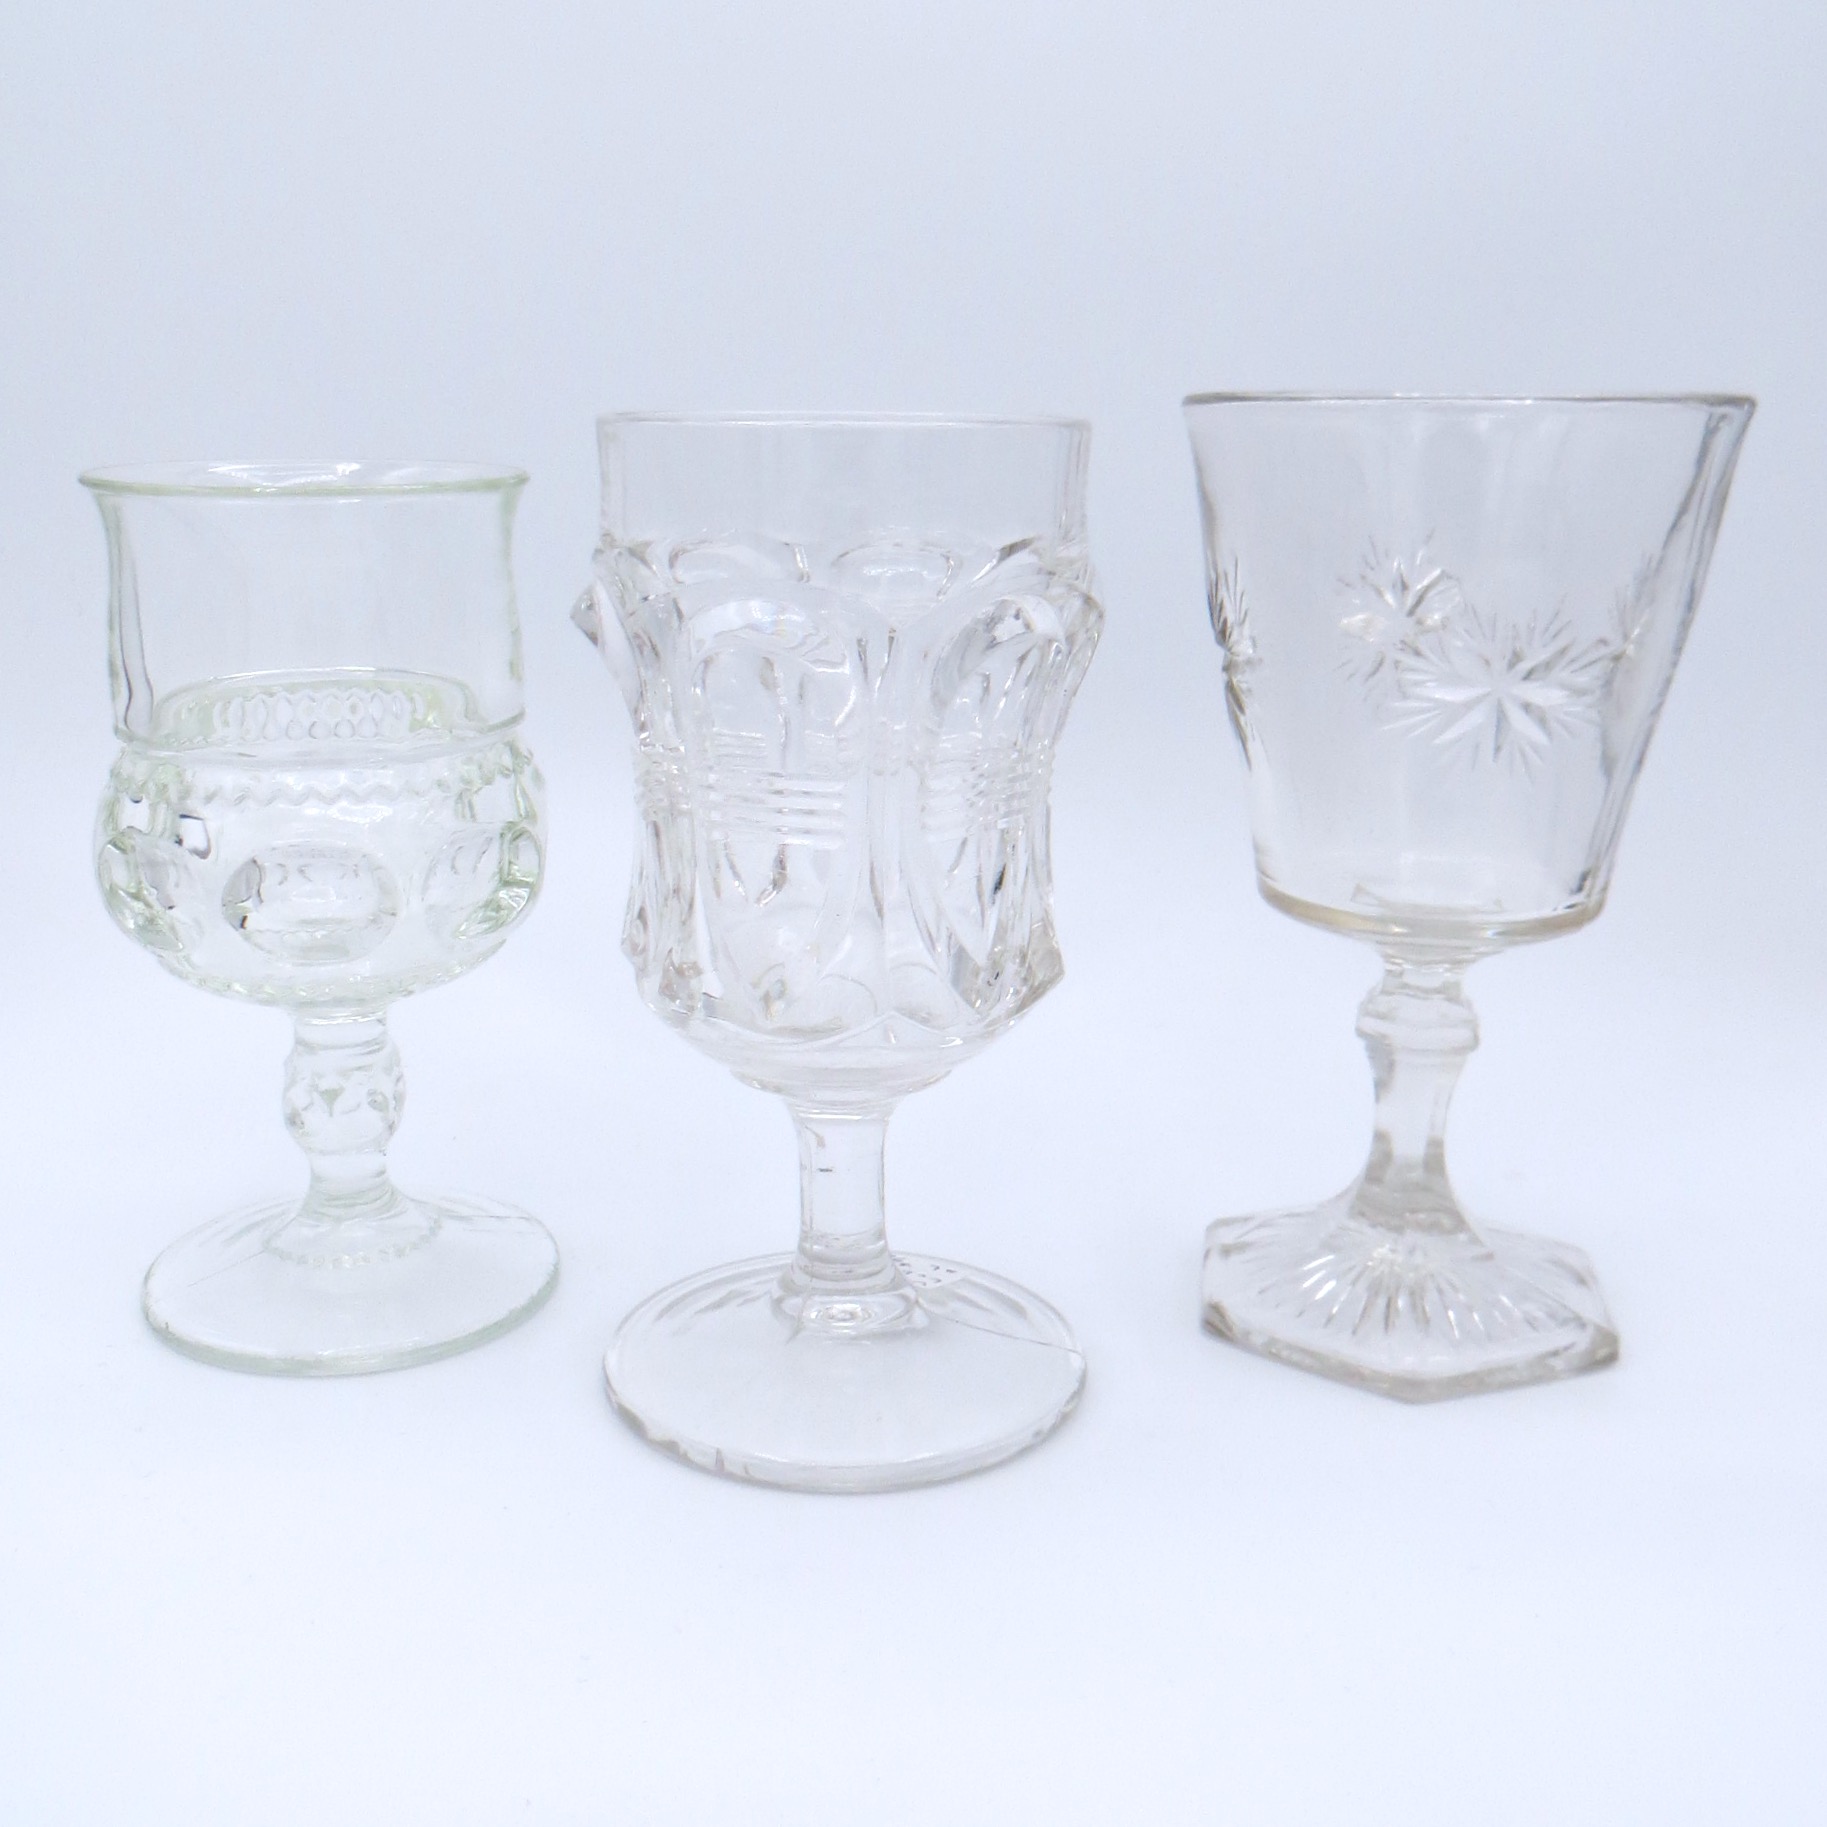 Three cut glass goblets with different patterns.